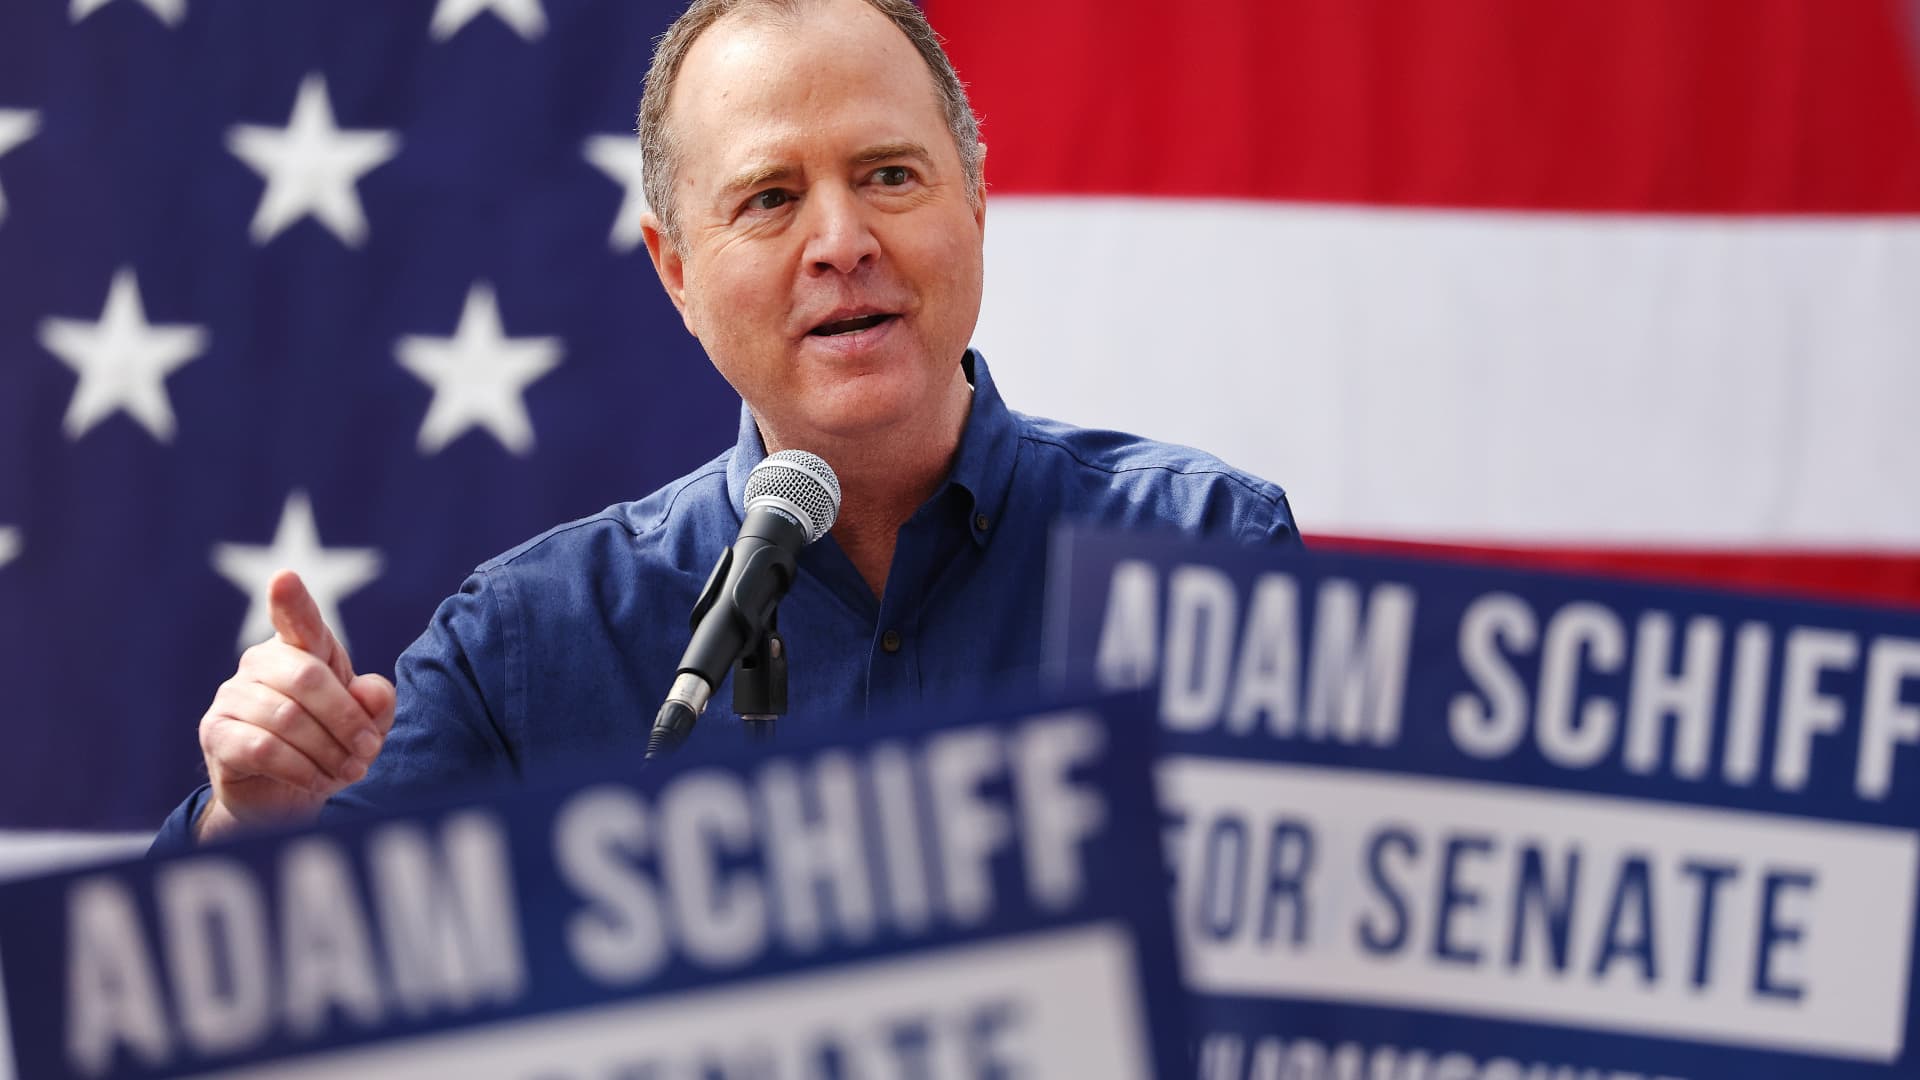 U.S. Rep. Adam Schiff, D-Calif., speaks to supporters outside the International Alliance of Theatrical Stage Employees Union Hall at the kickoff rally for his two-week California for All Tour in Burbank, California, on Feb. 11, 2023.